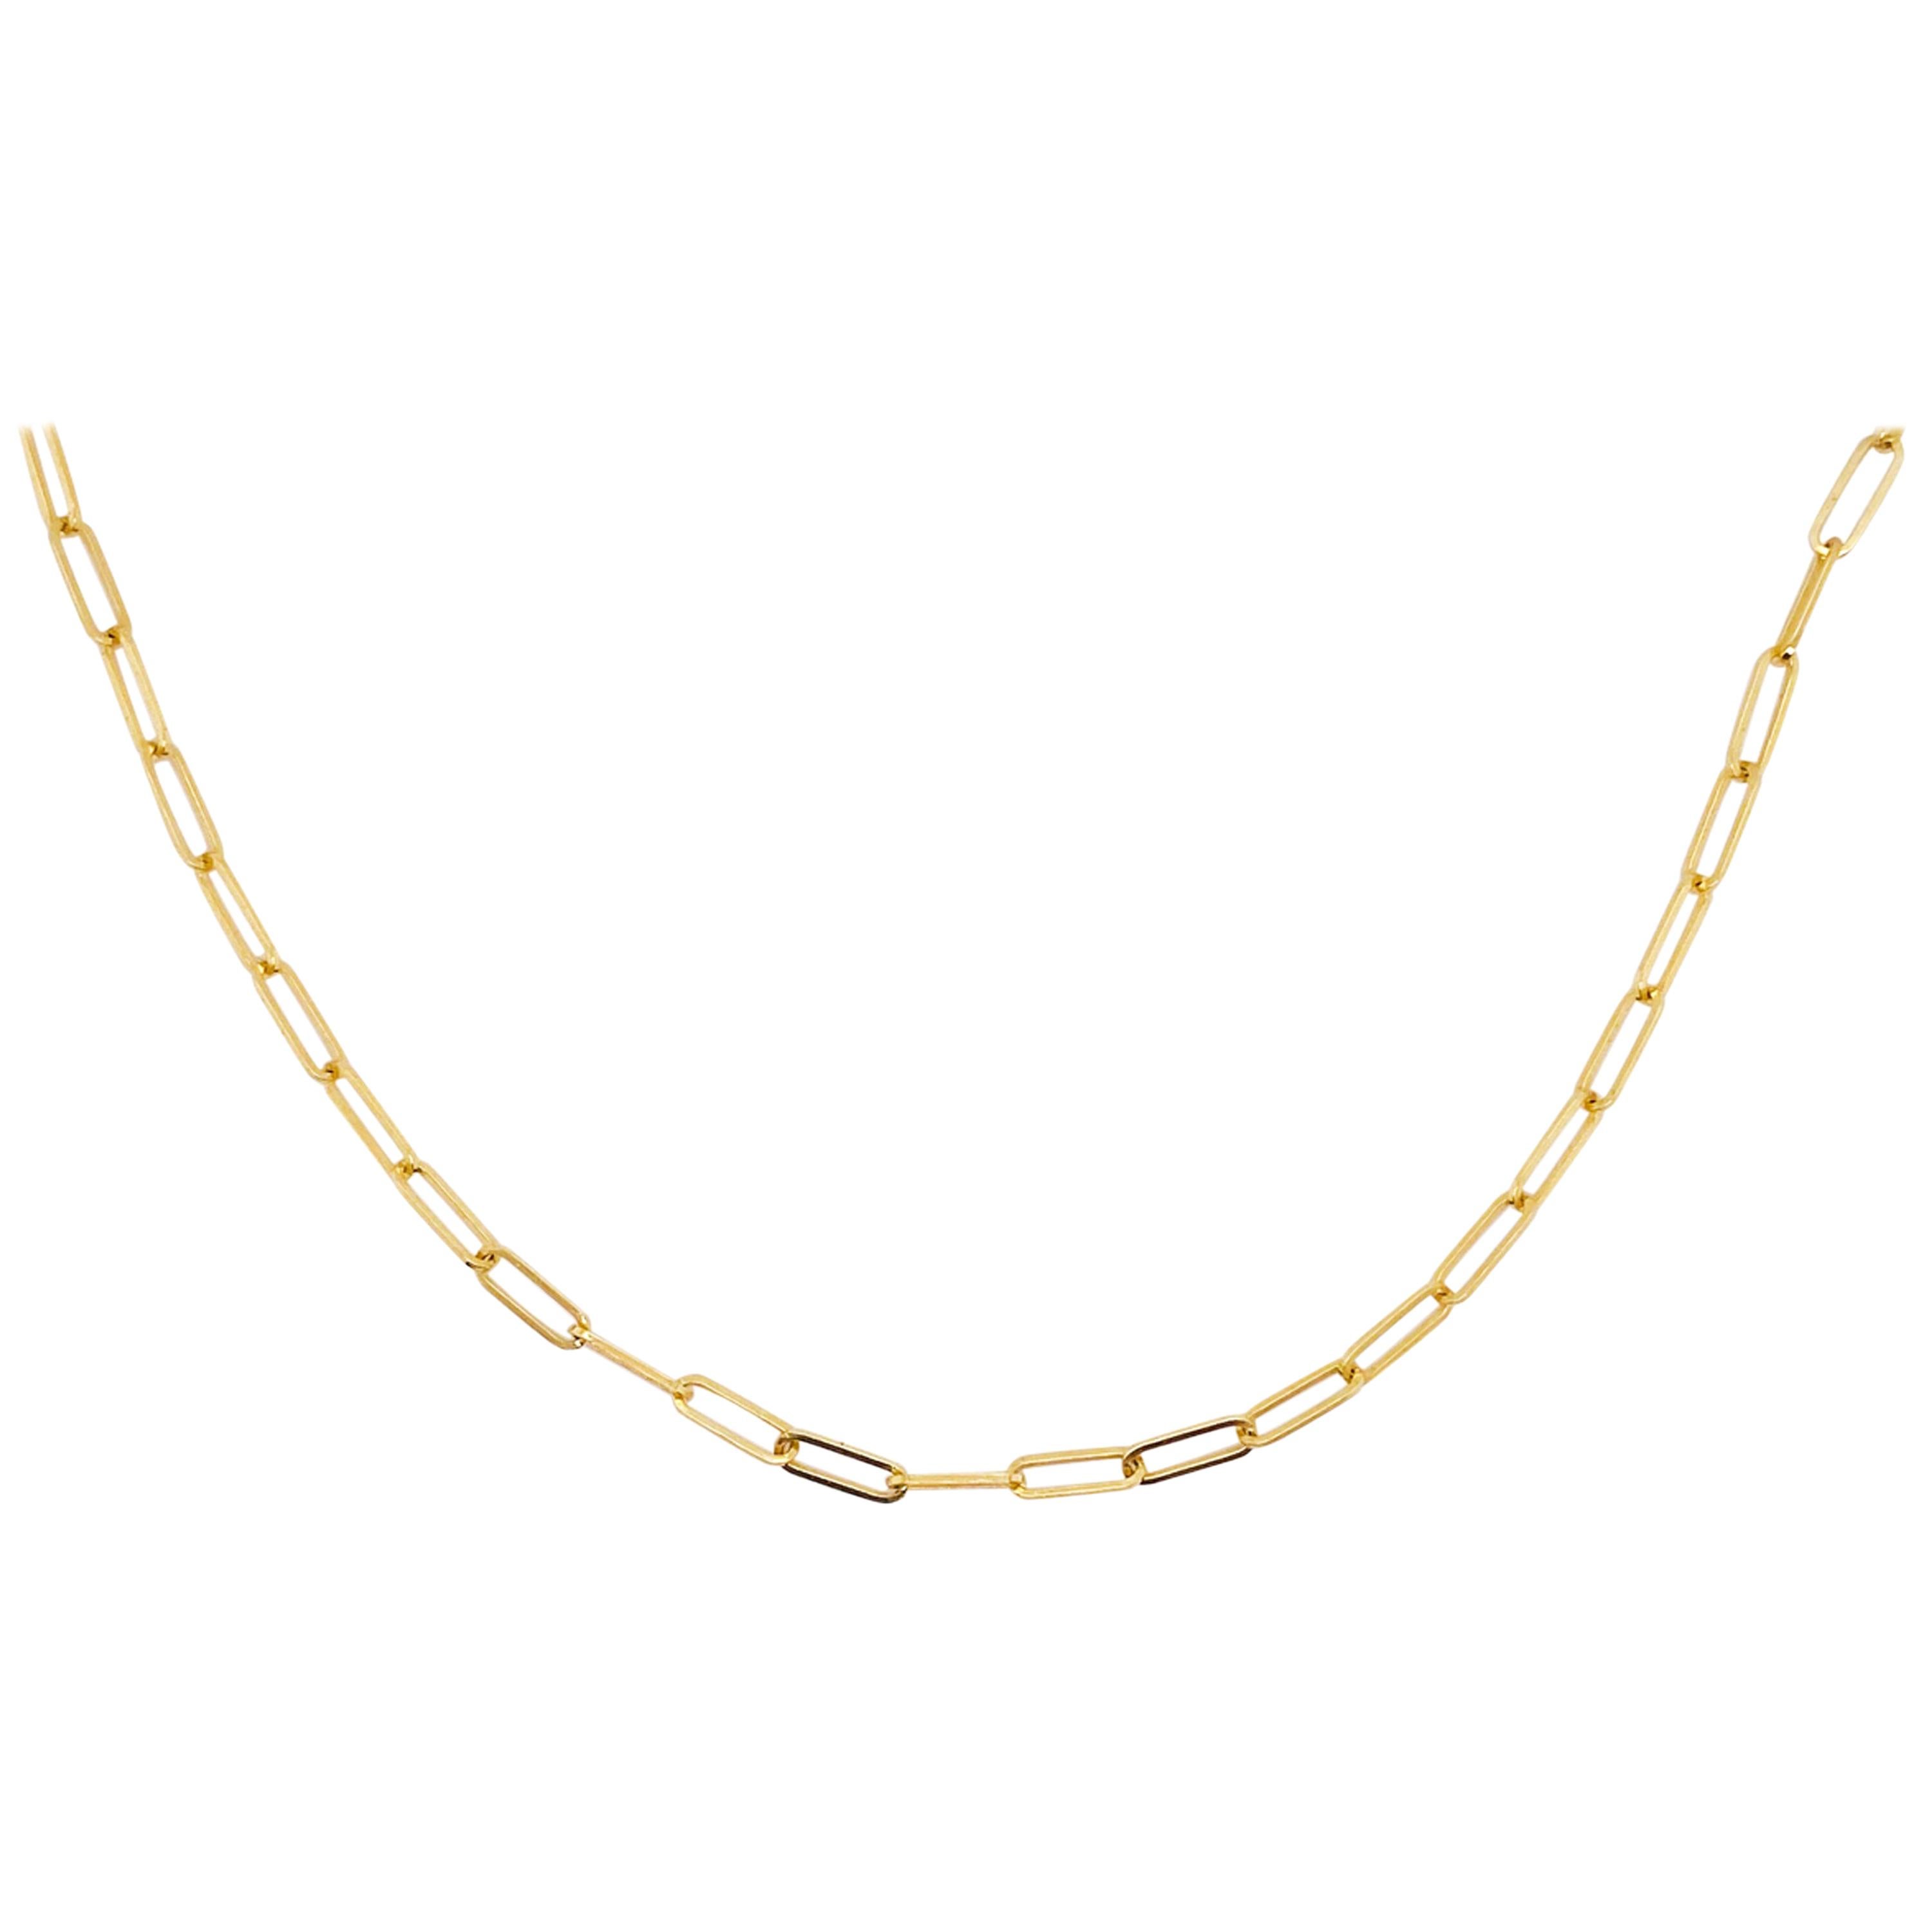 Five Star Jewelry Chain Necklaces